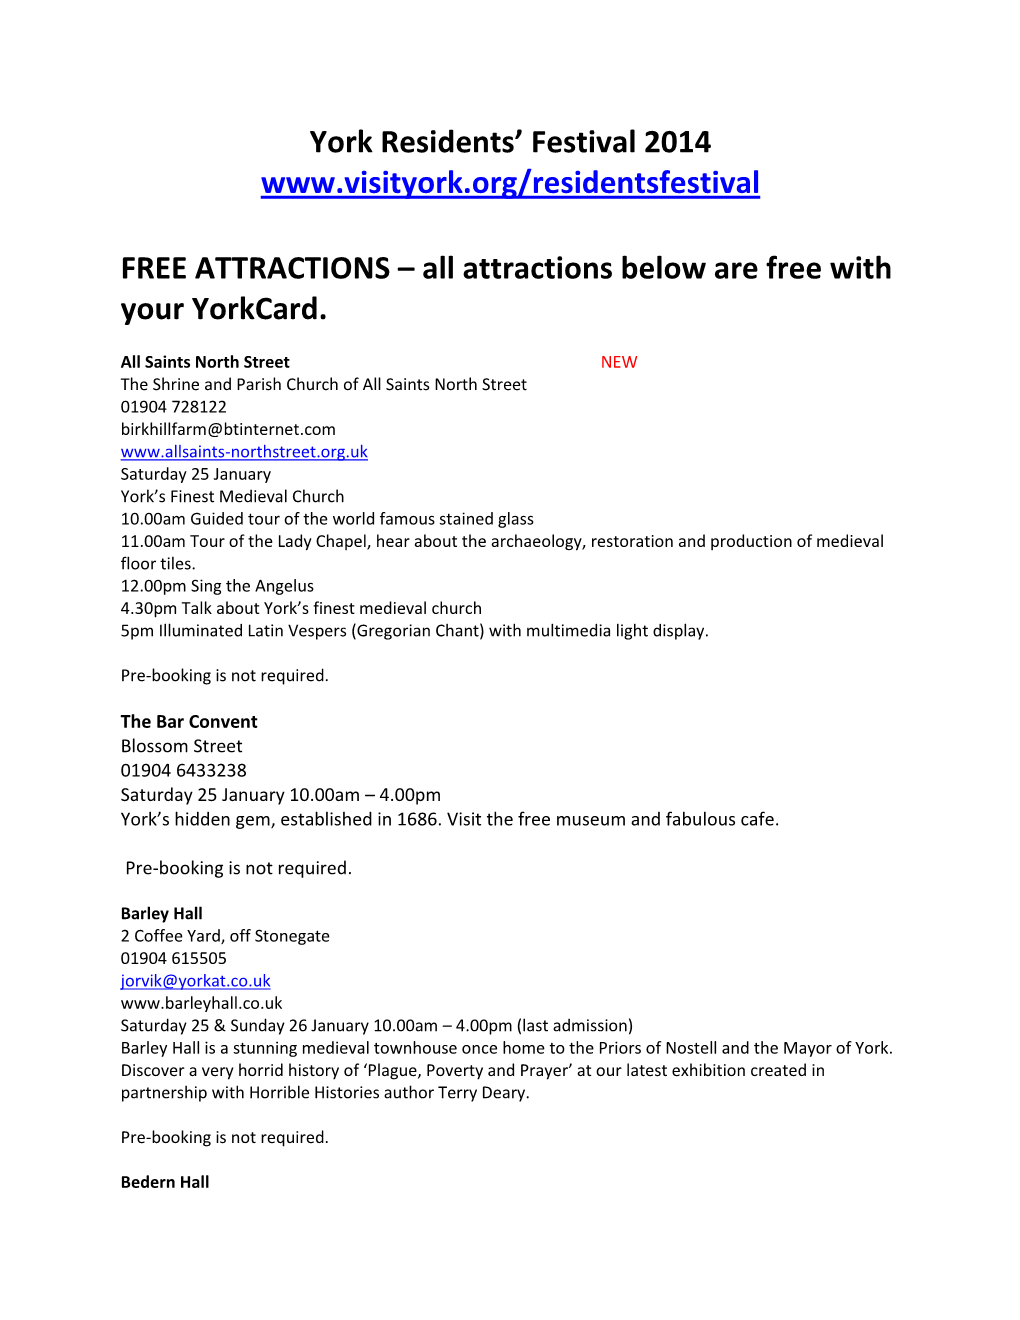 FREE ATTRACTIONS – All Attractions Below Are Free with Your Yorkcard